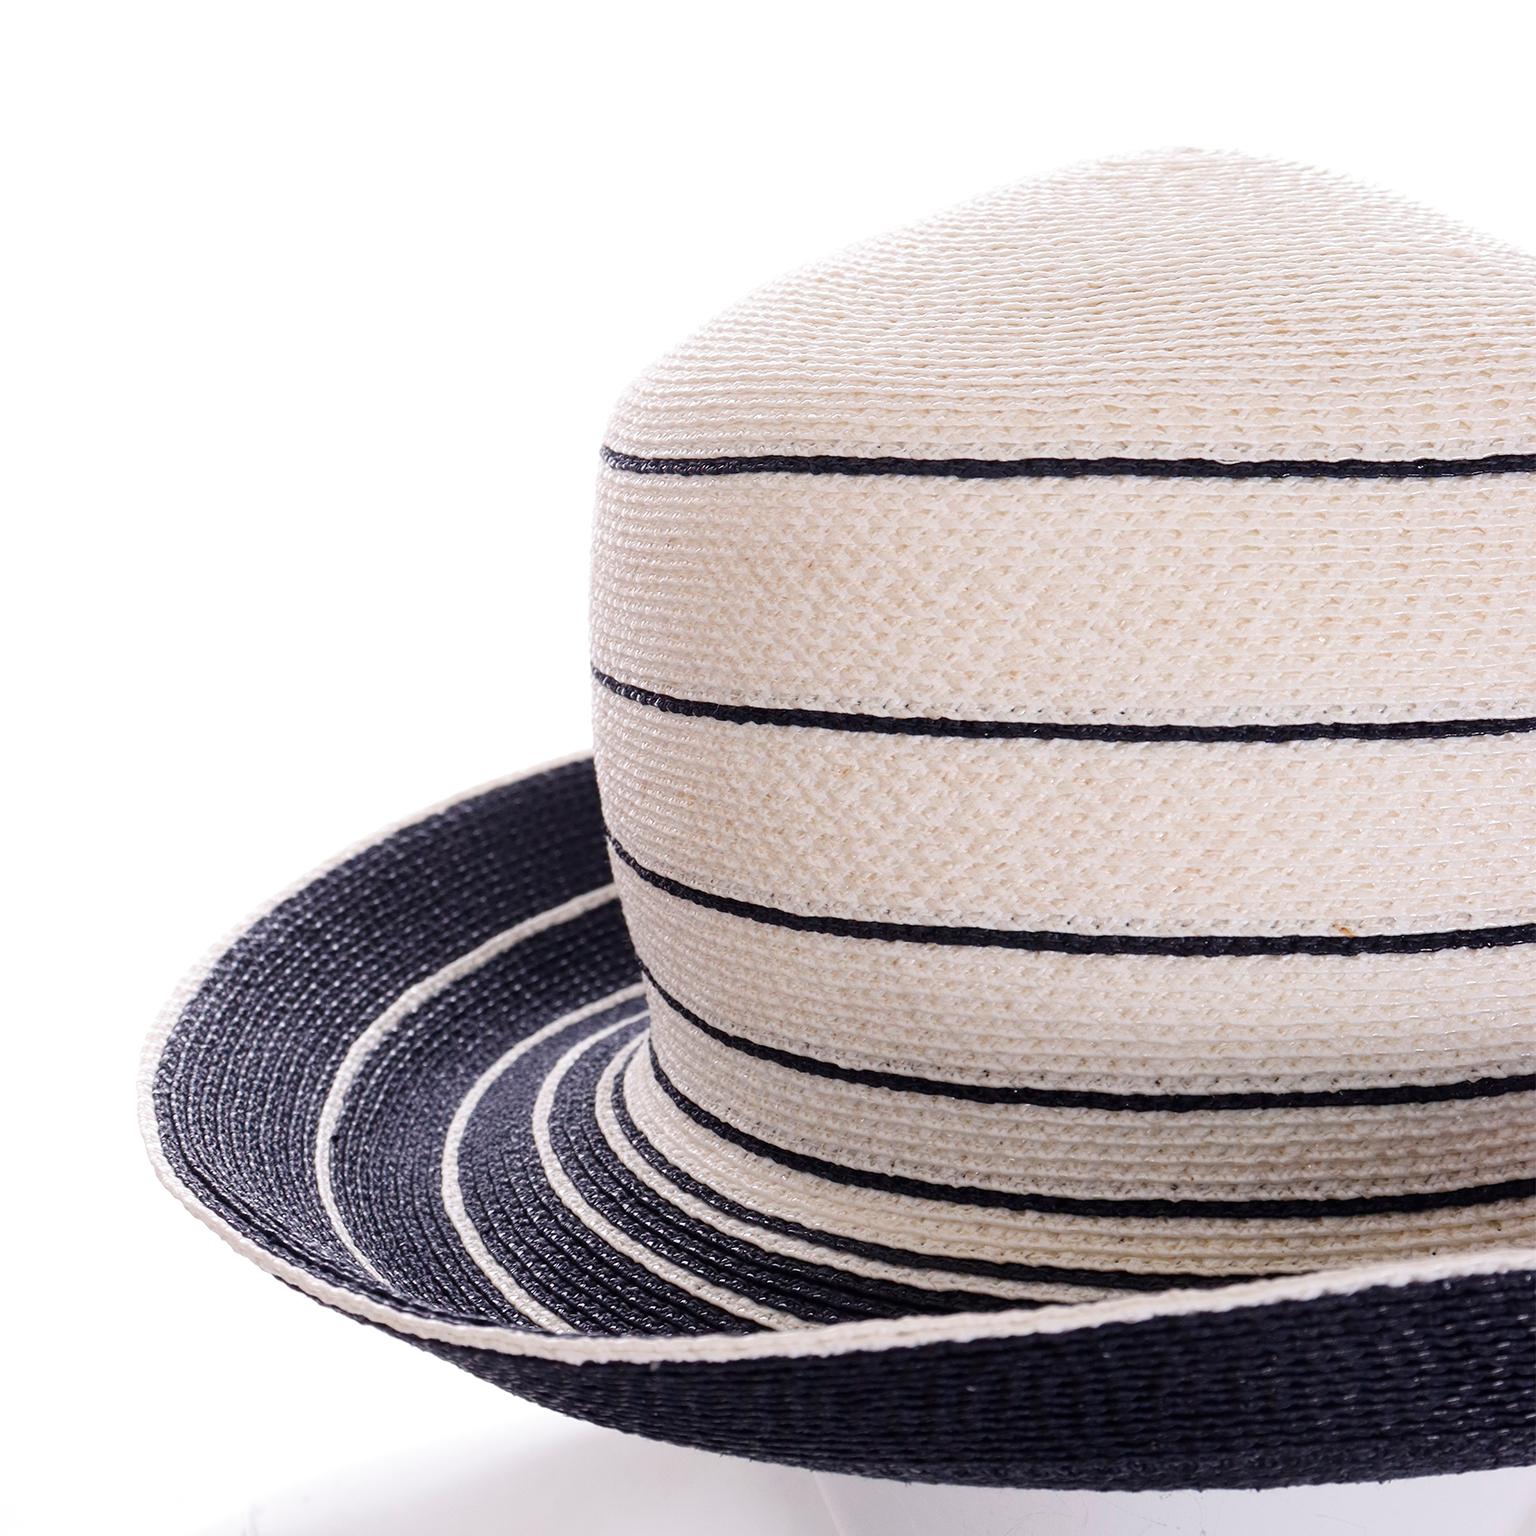 Patricia Underwood New York Blue and White Vintage Coated Straw Summer Hat In Excellent Condition For Sale In Portland, OR